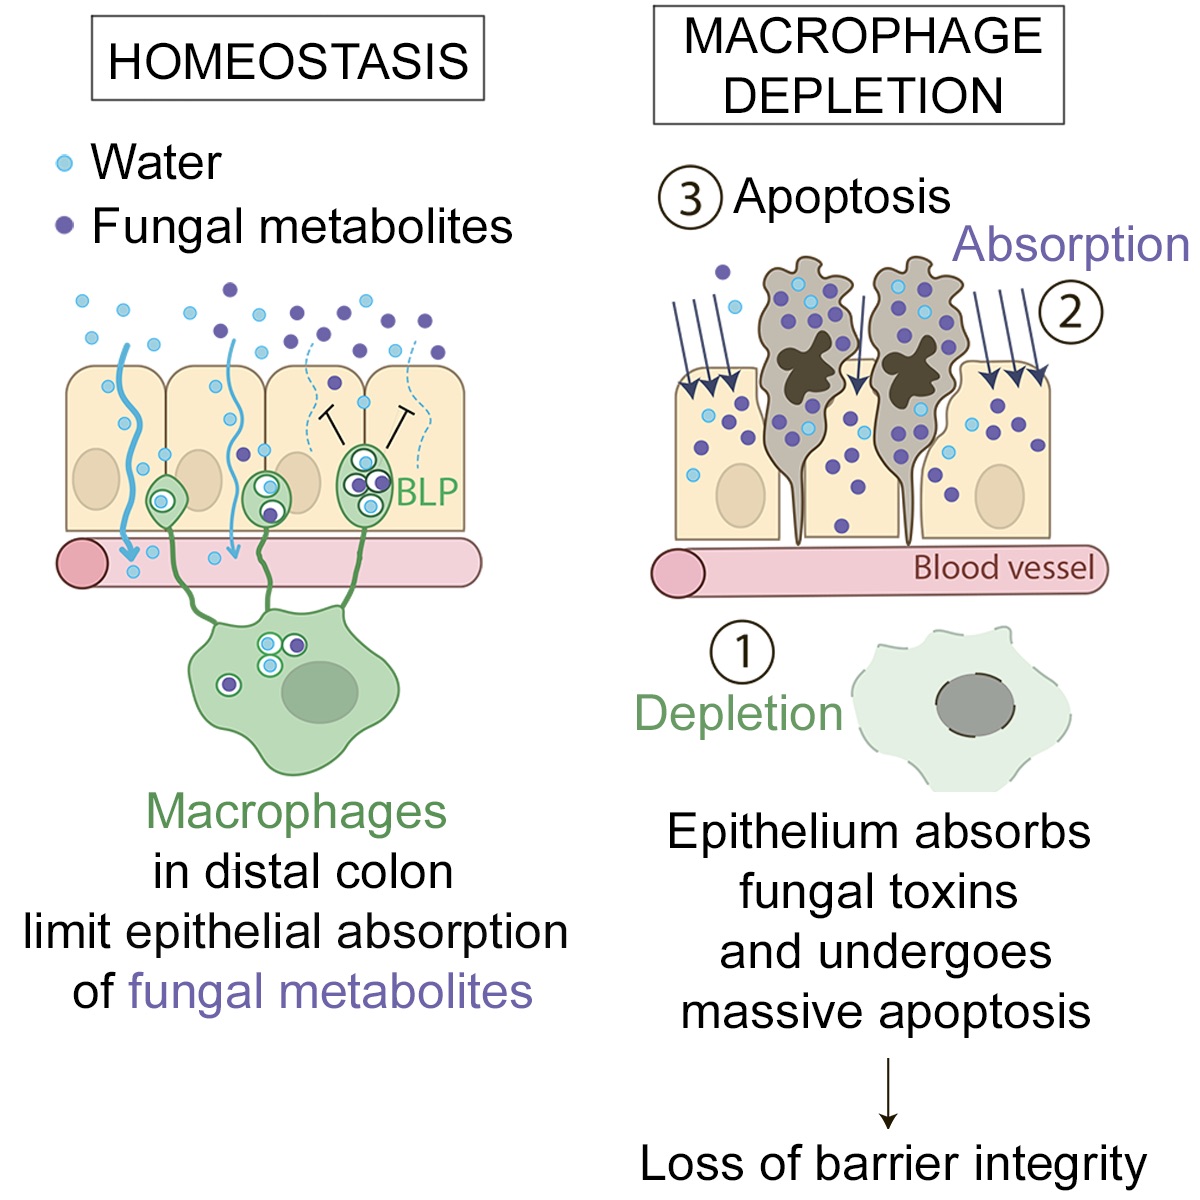 Out now! An #unexpected and #essential role of #macrophages in the maintenance of colon-#microbiota interactions in #homeostasis. @institut_curie bit.ly/33YFBU8